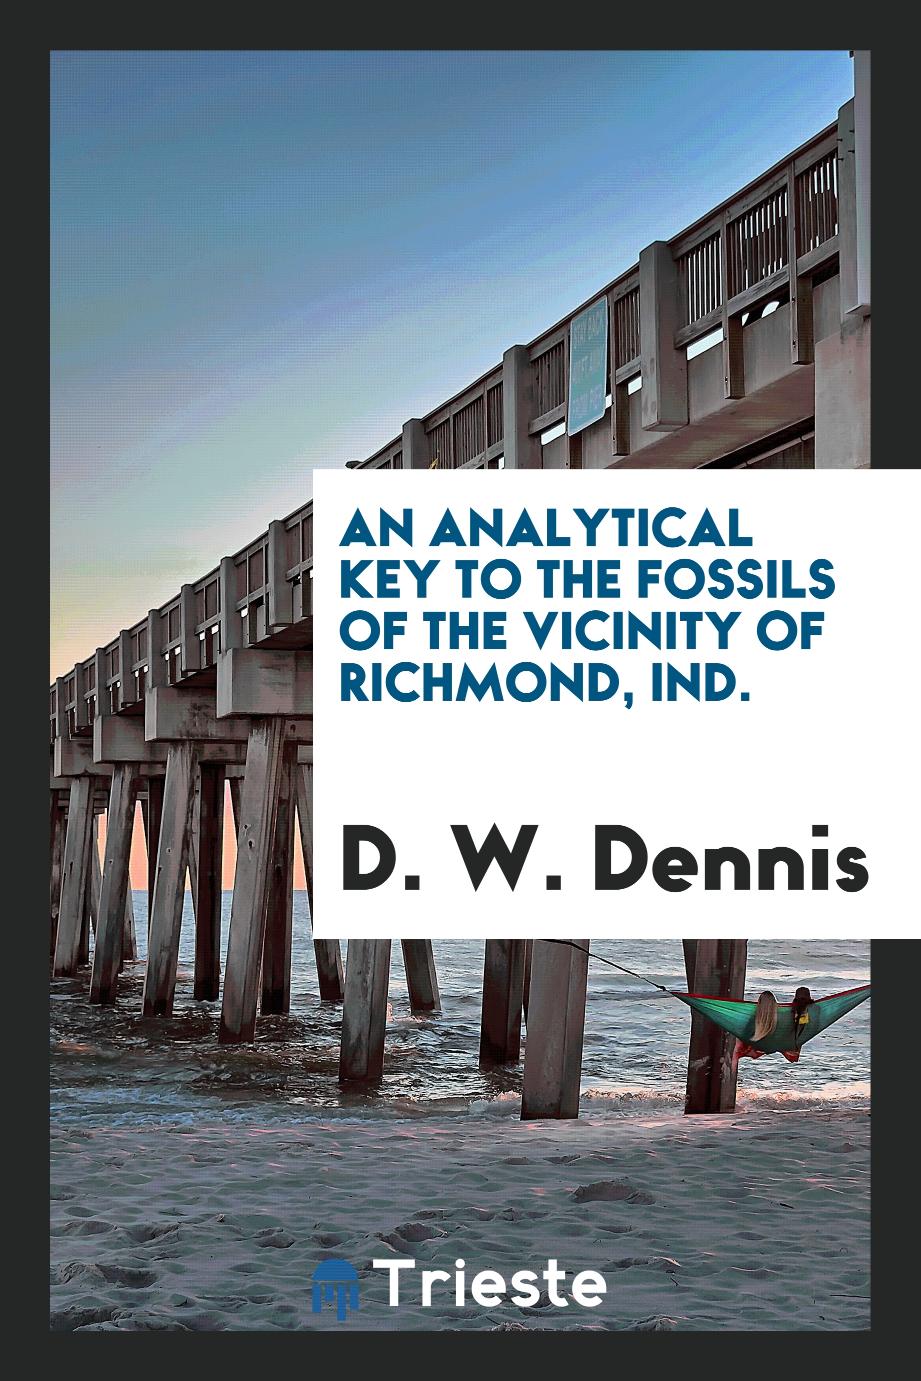 An Analytical Key to the Fossils of the Vicinity of Richmond, Ind.